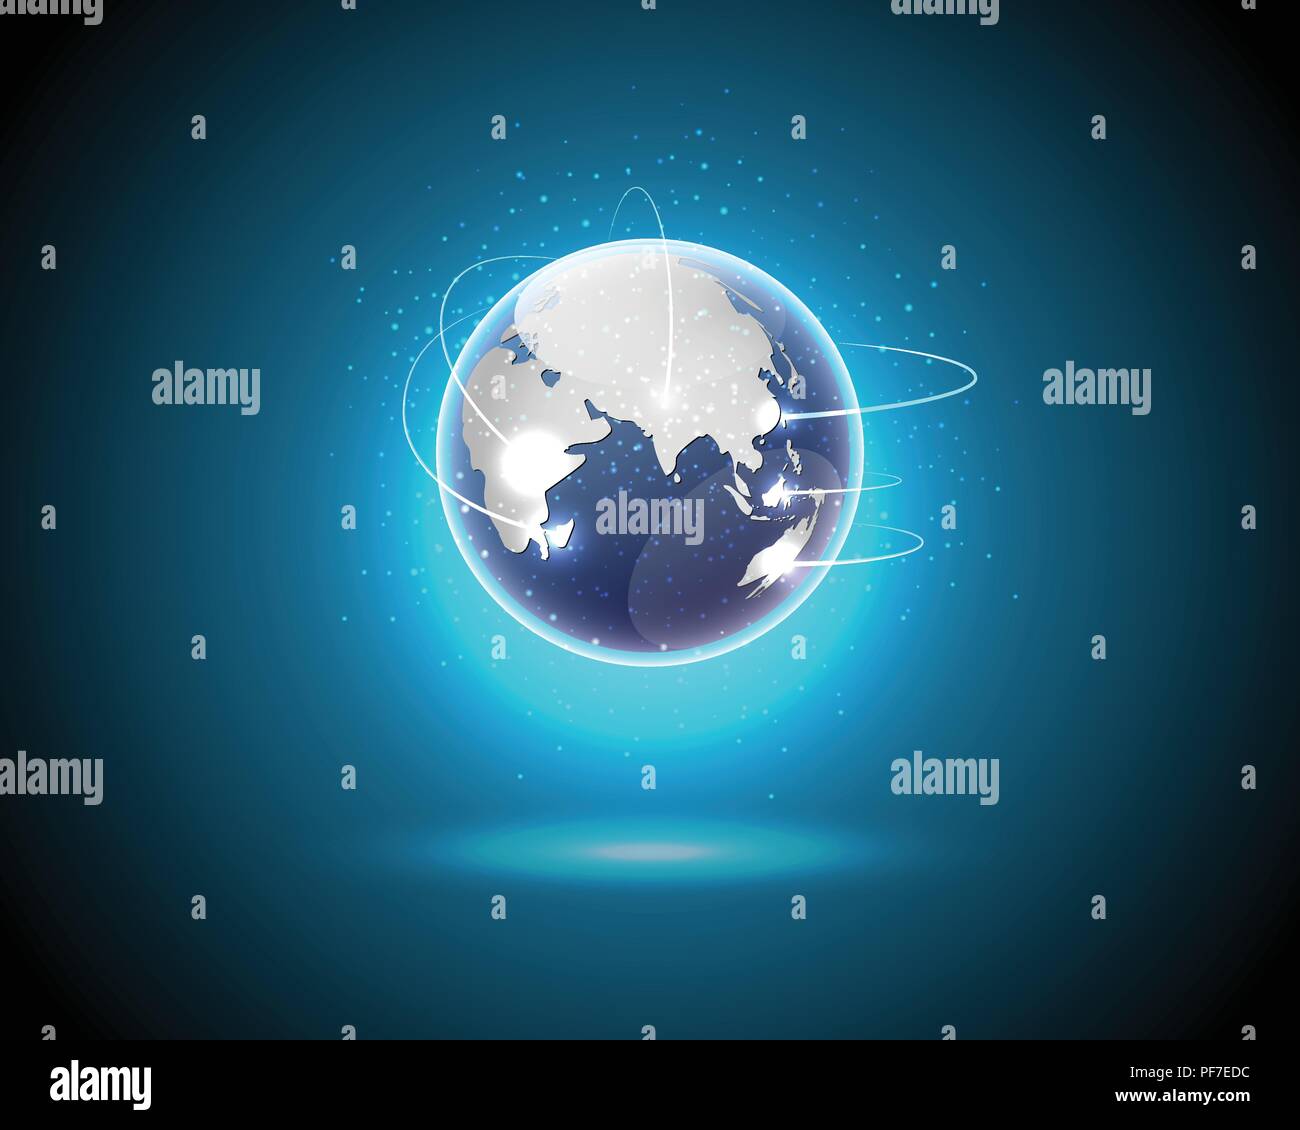 World global internet network connection big data information technology connecting business model concepts. Vector illustration eps10 Stock Vector